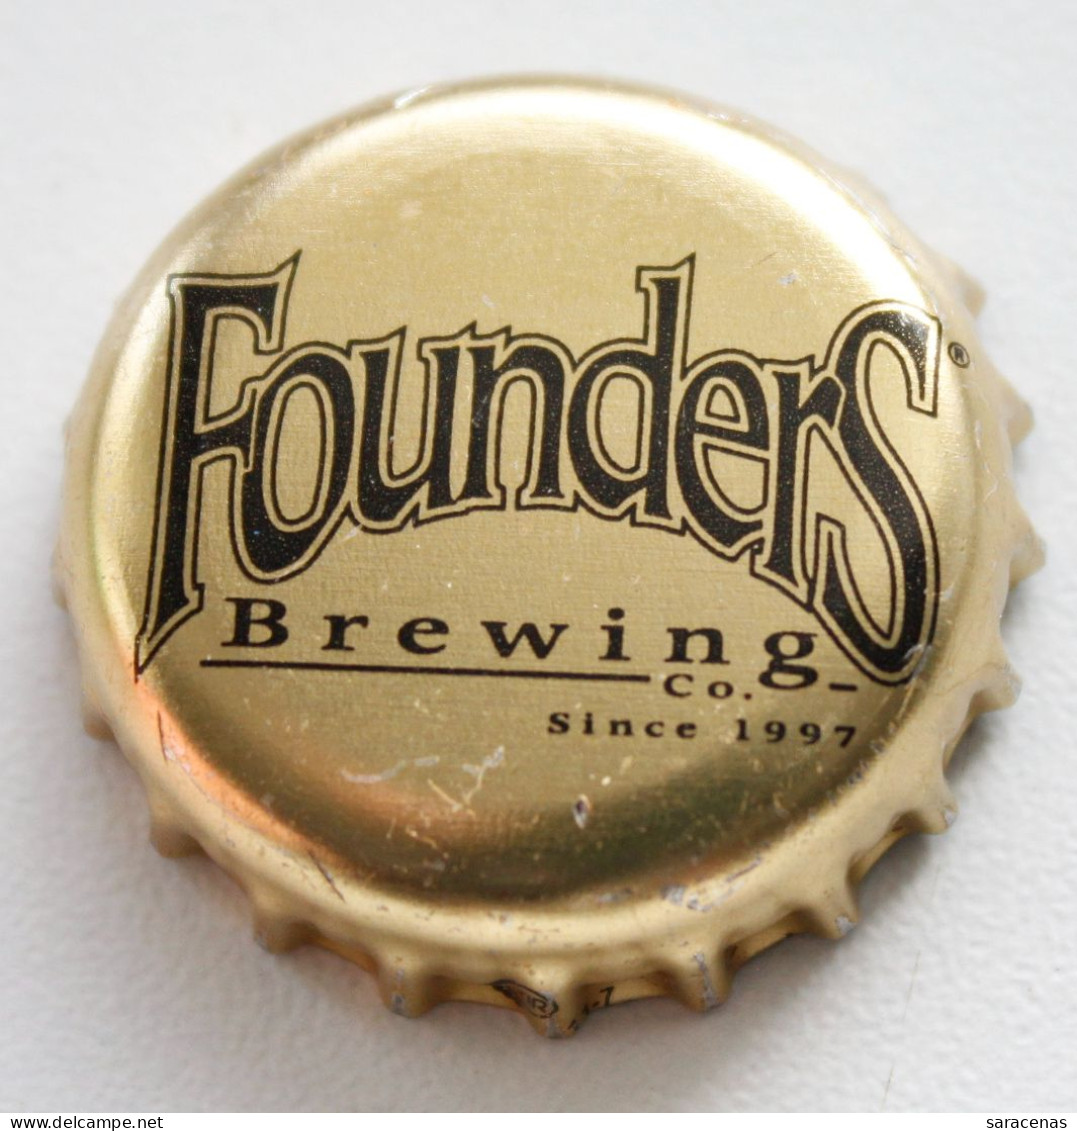 United States Founders Beer Bottle Cap - Limonade